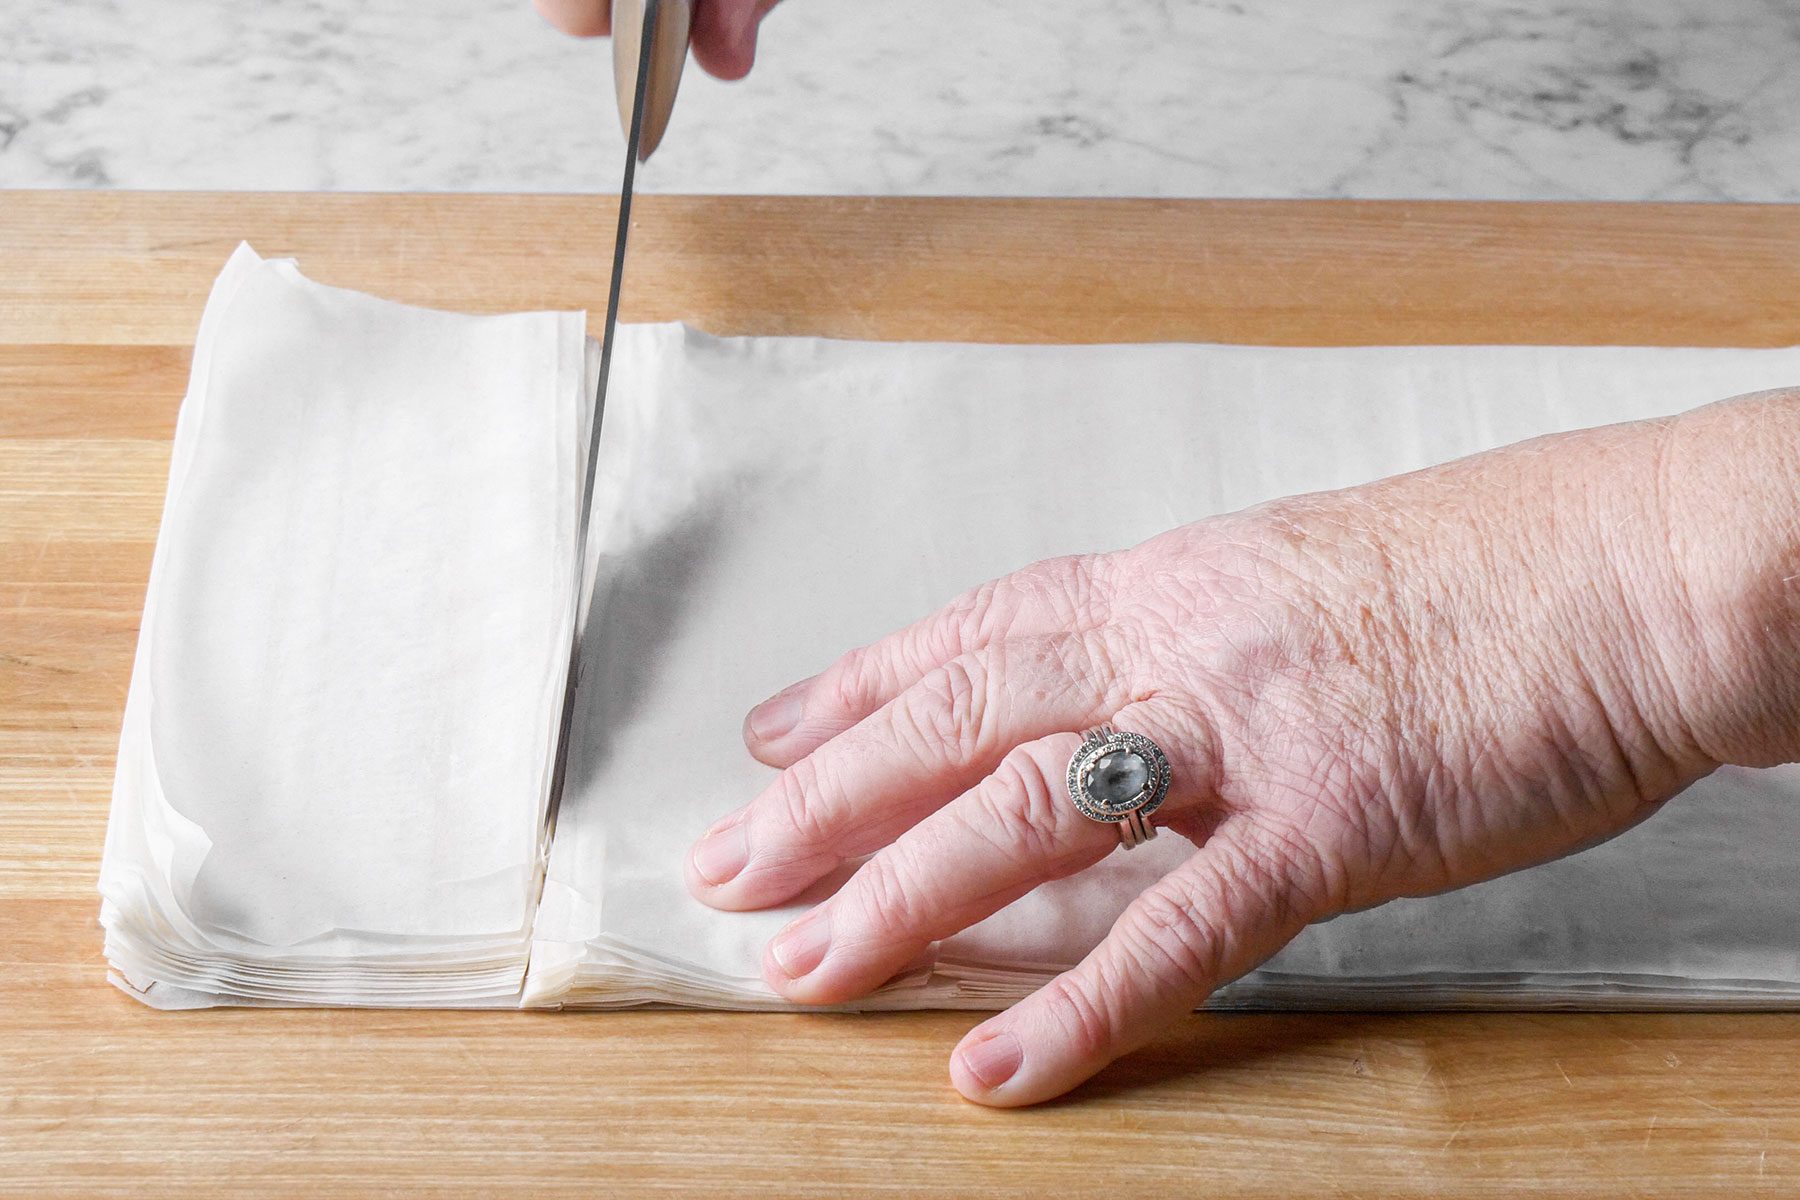 Cutting phyllo dough sheets with knife on wooden board